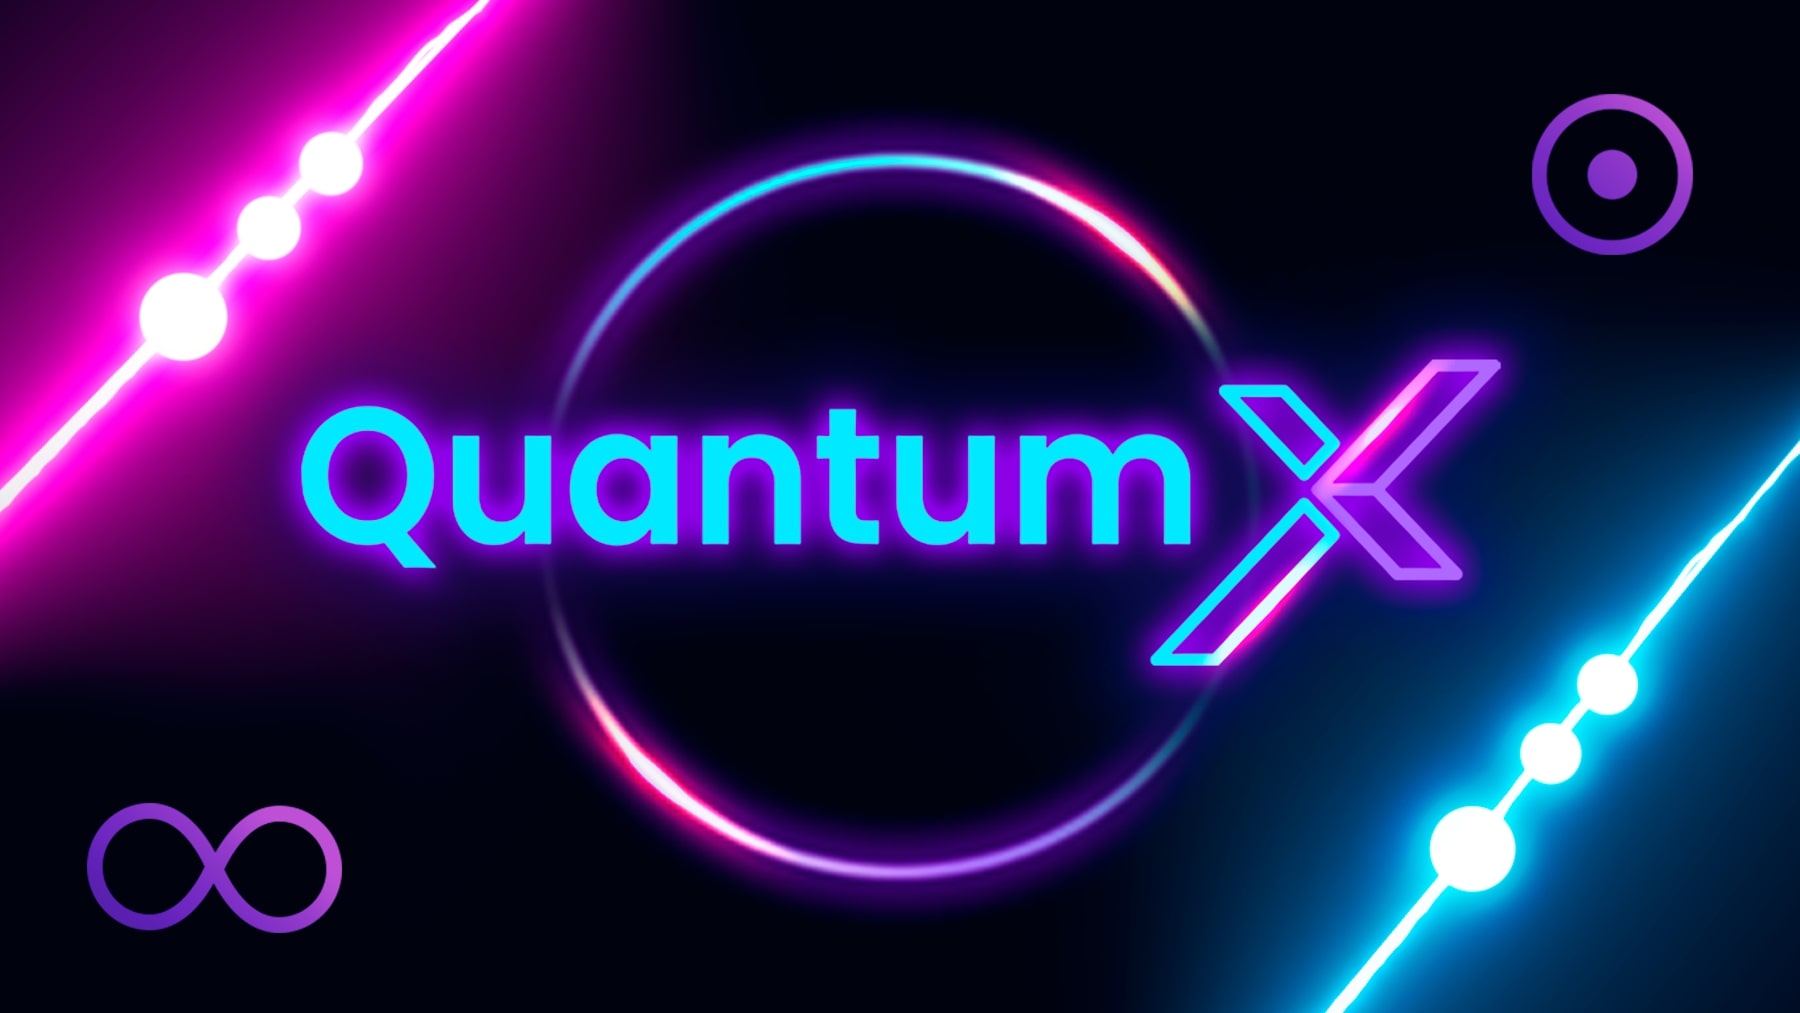 An illustration of Quantum X OnlyPlay, a cutting-edge technology that is revolutionizing the gaming industry with its advanced quantum computing capabilities